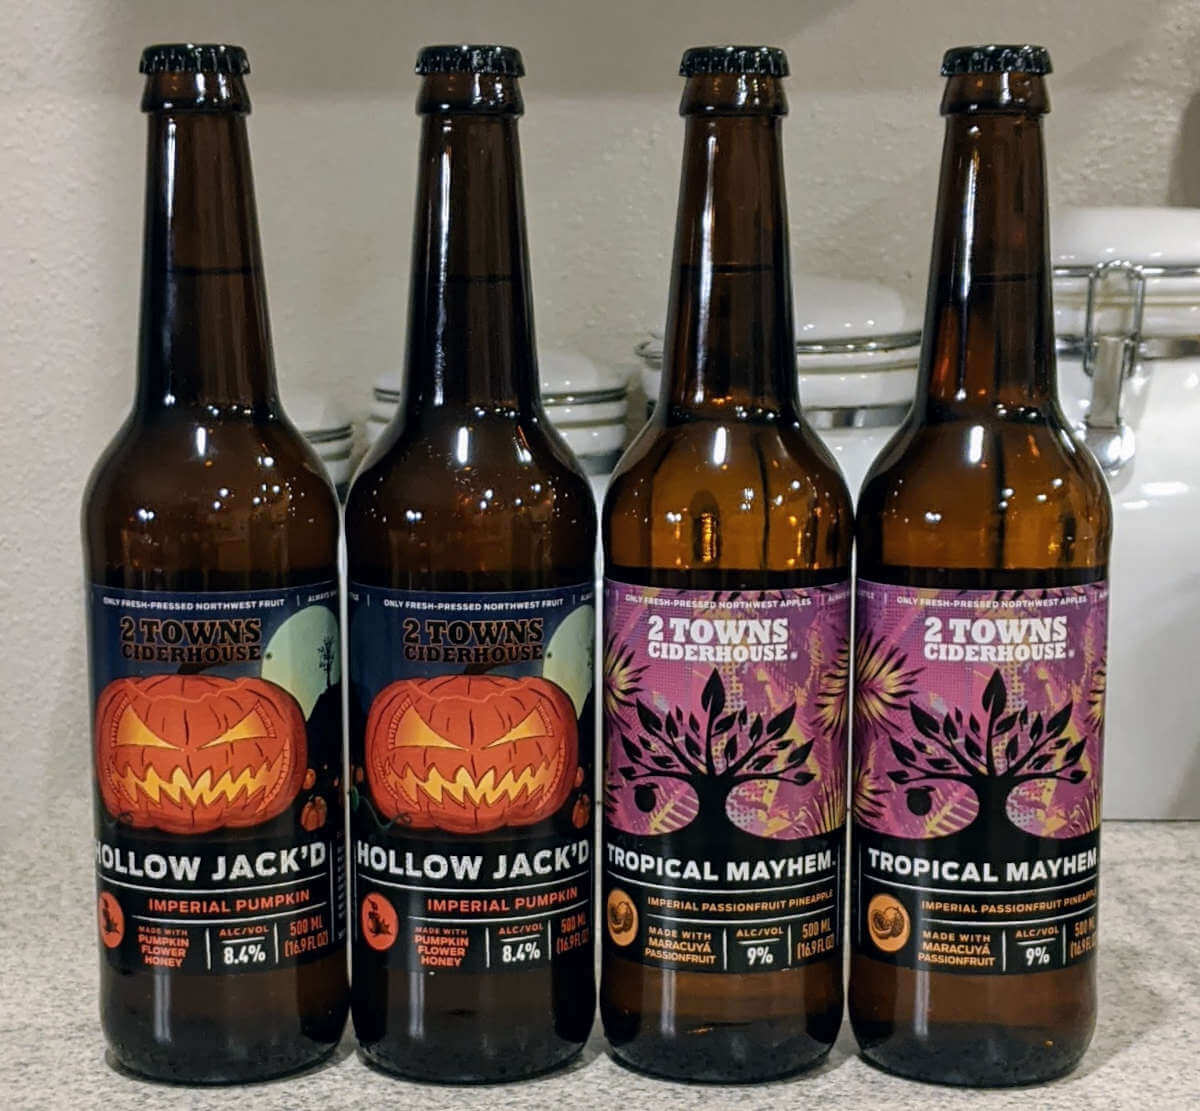 Received: 2 Towns Ciderhouse Tropical Mayhem and Hollow Jack’d